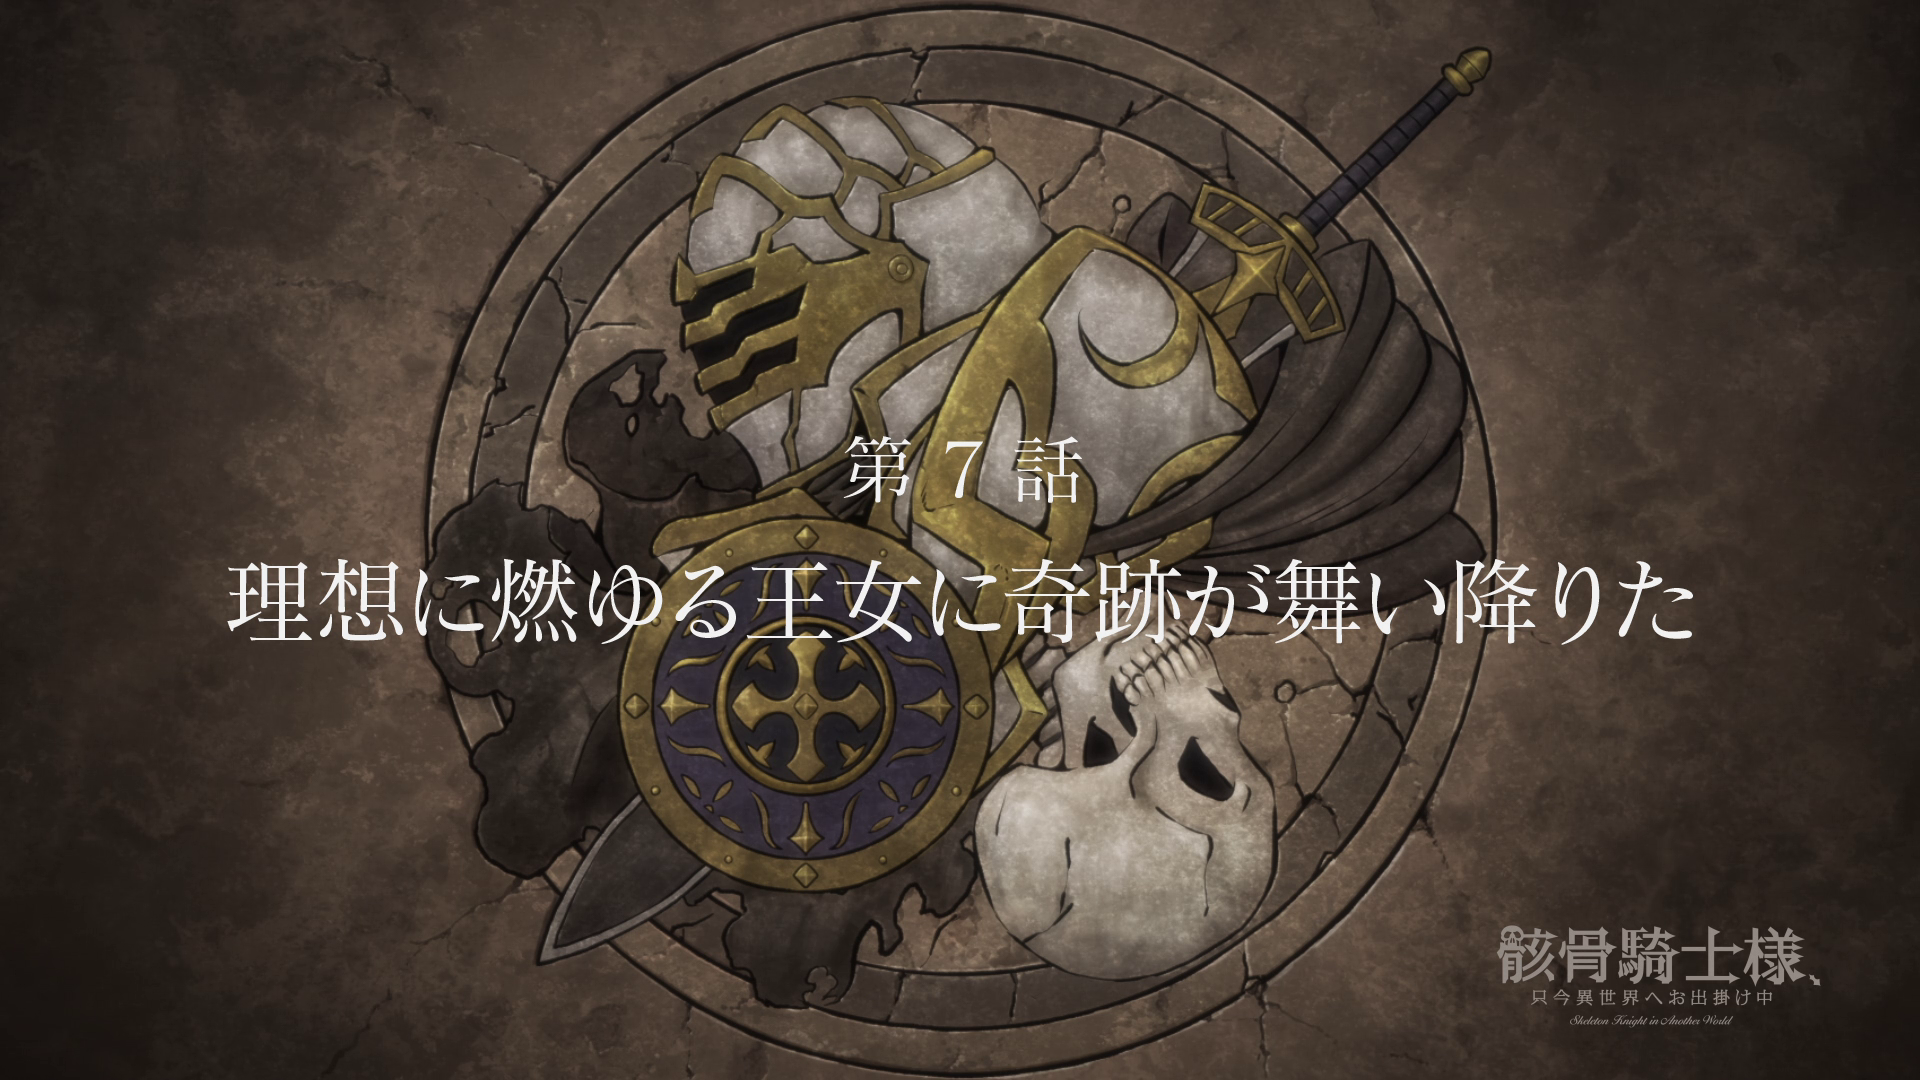 Skeleton Knight in Another World - New Visual (Spring 2022 Dub